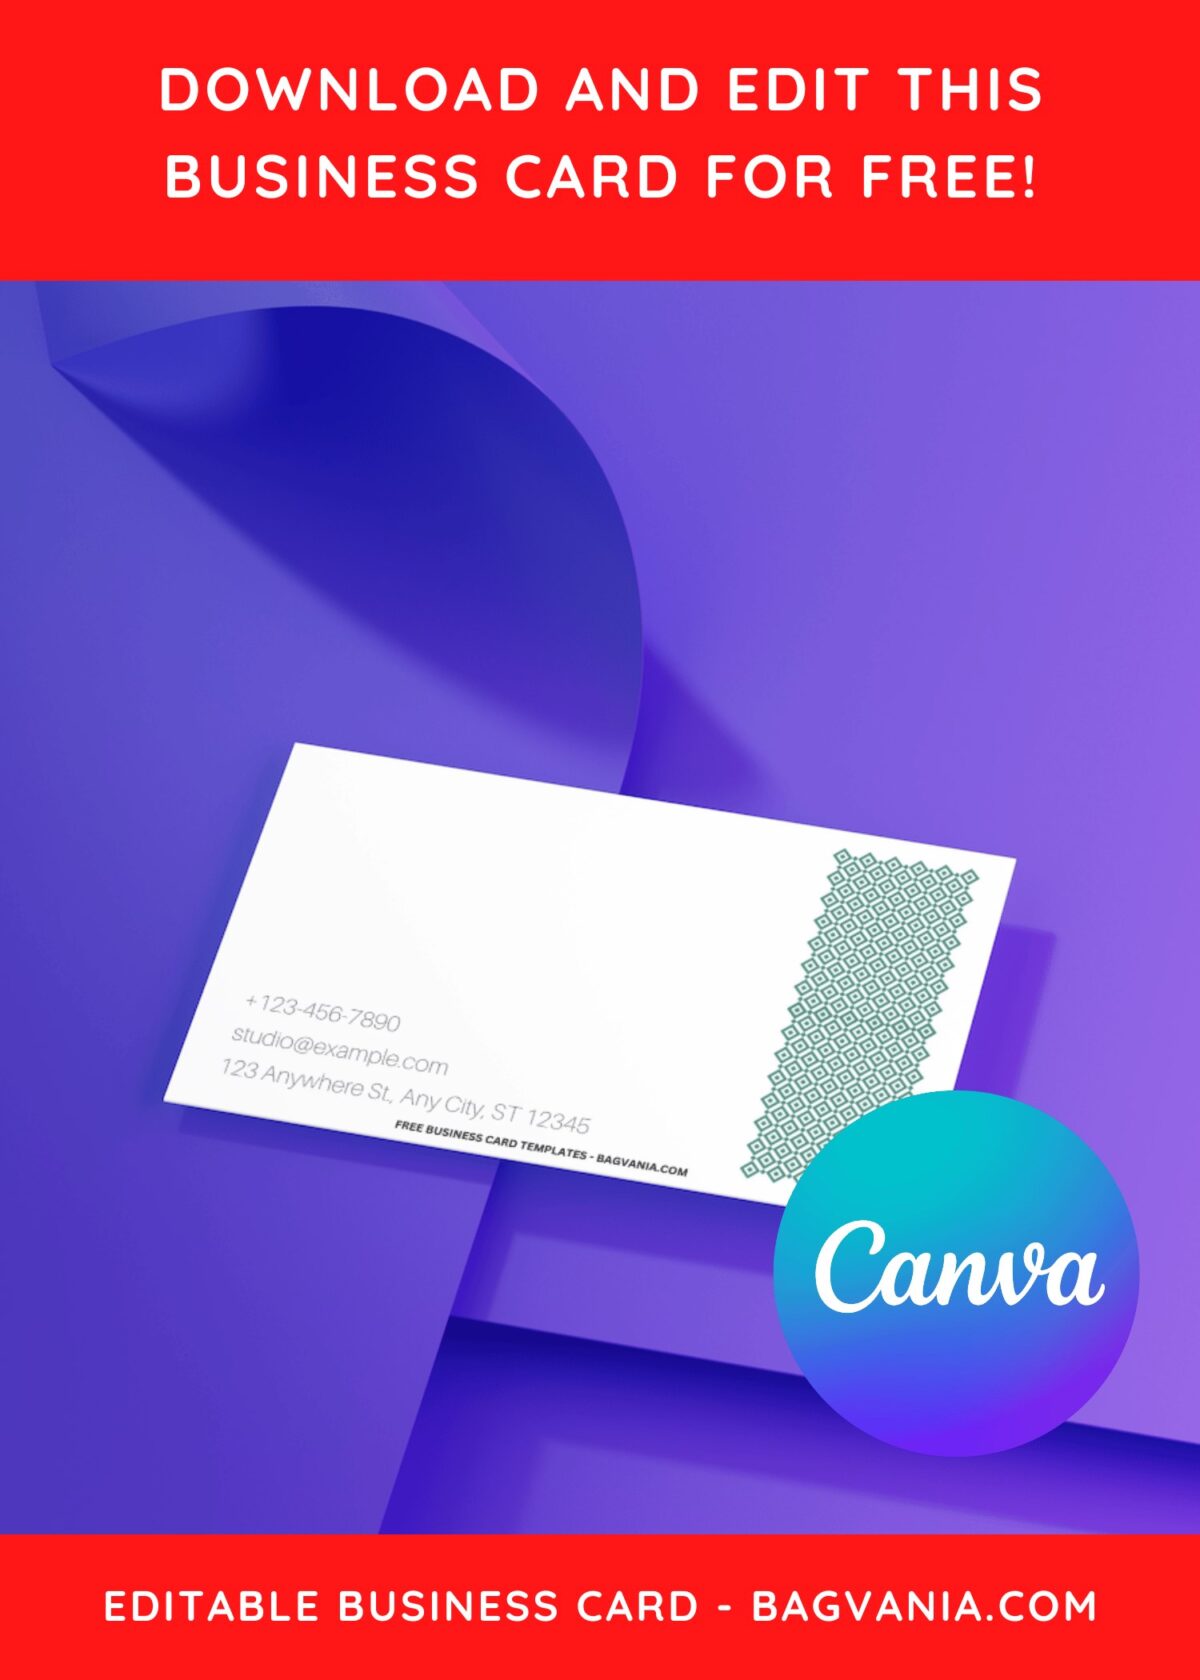 10+ Edgy Canva Business Card Templates F